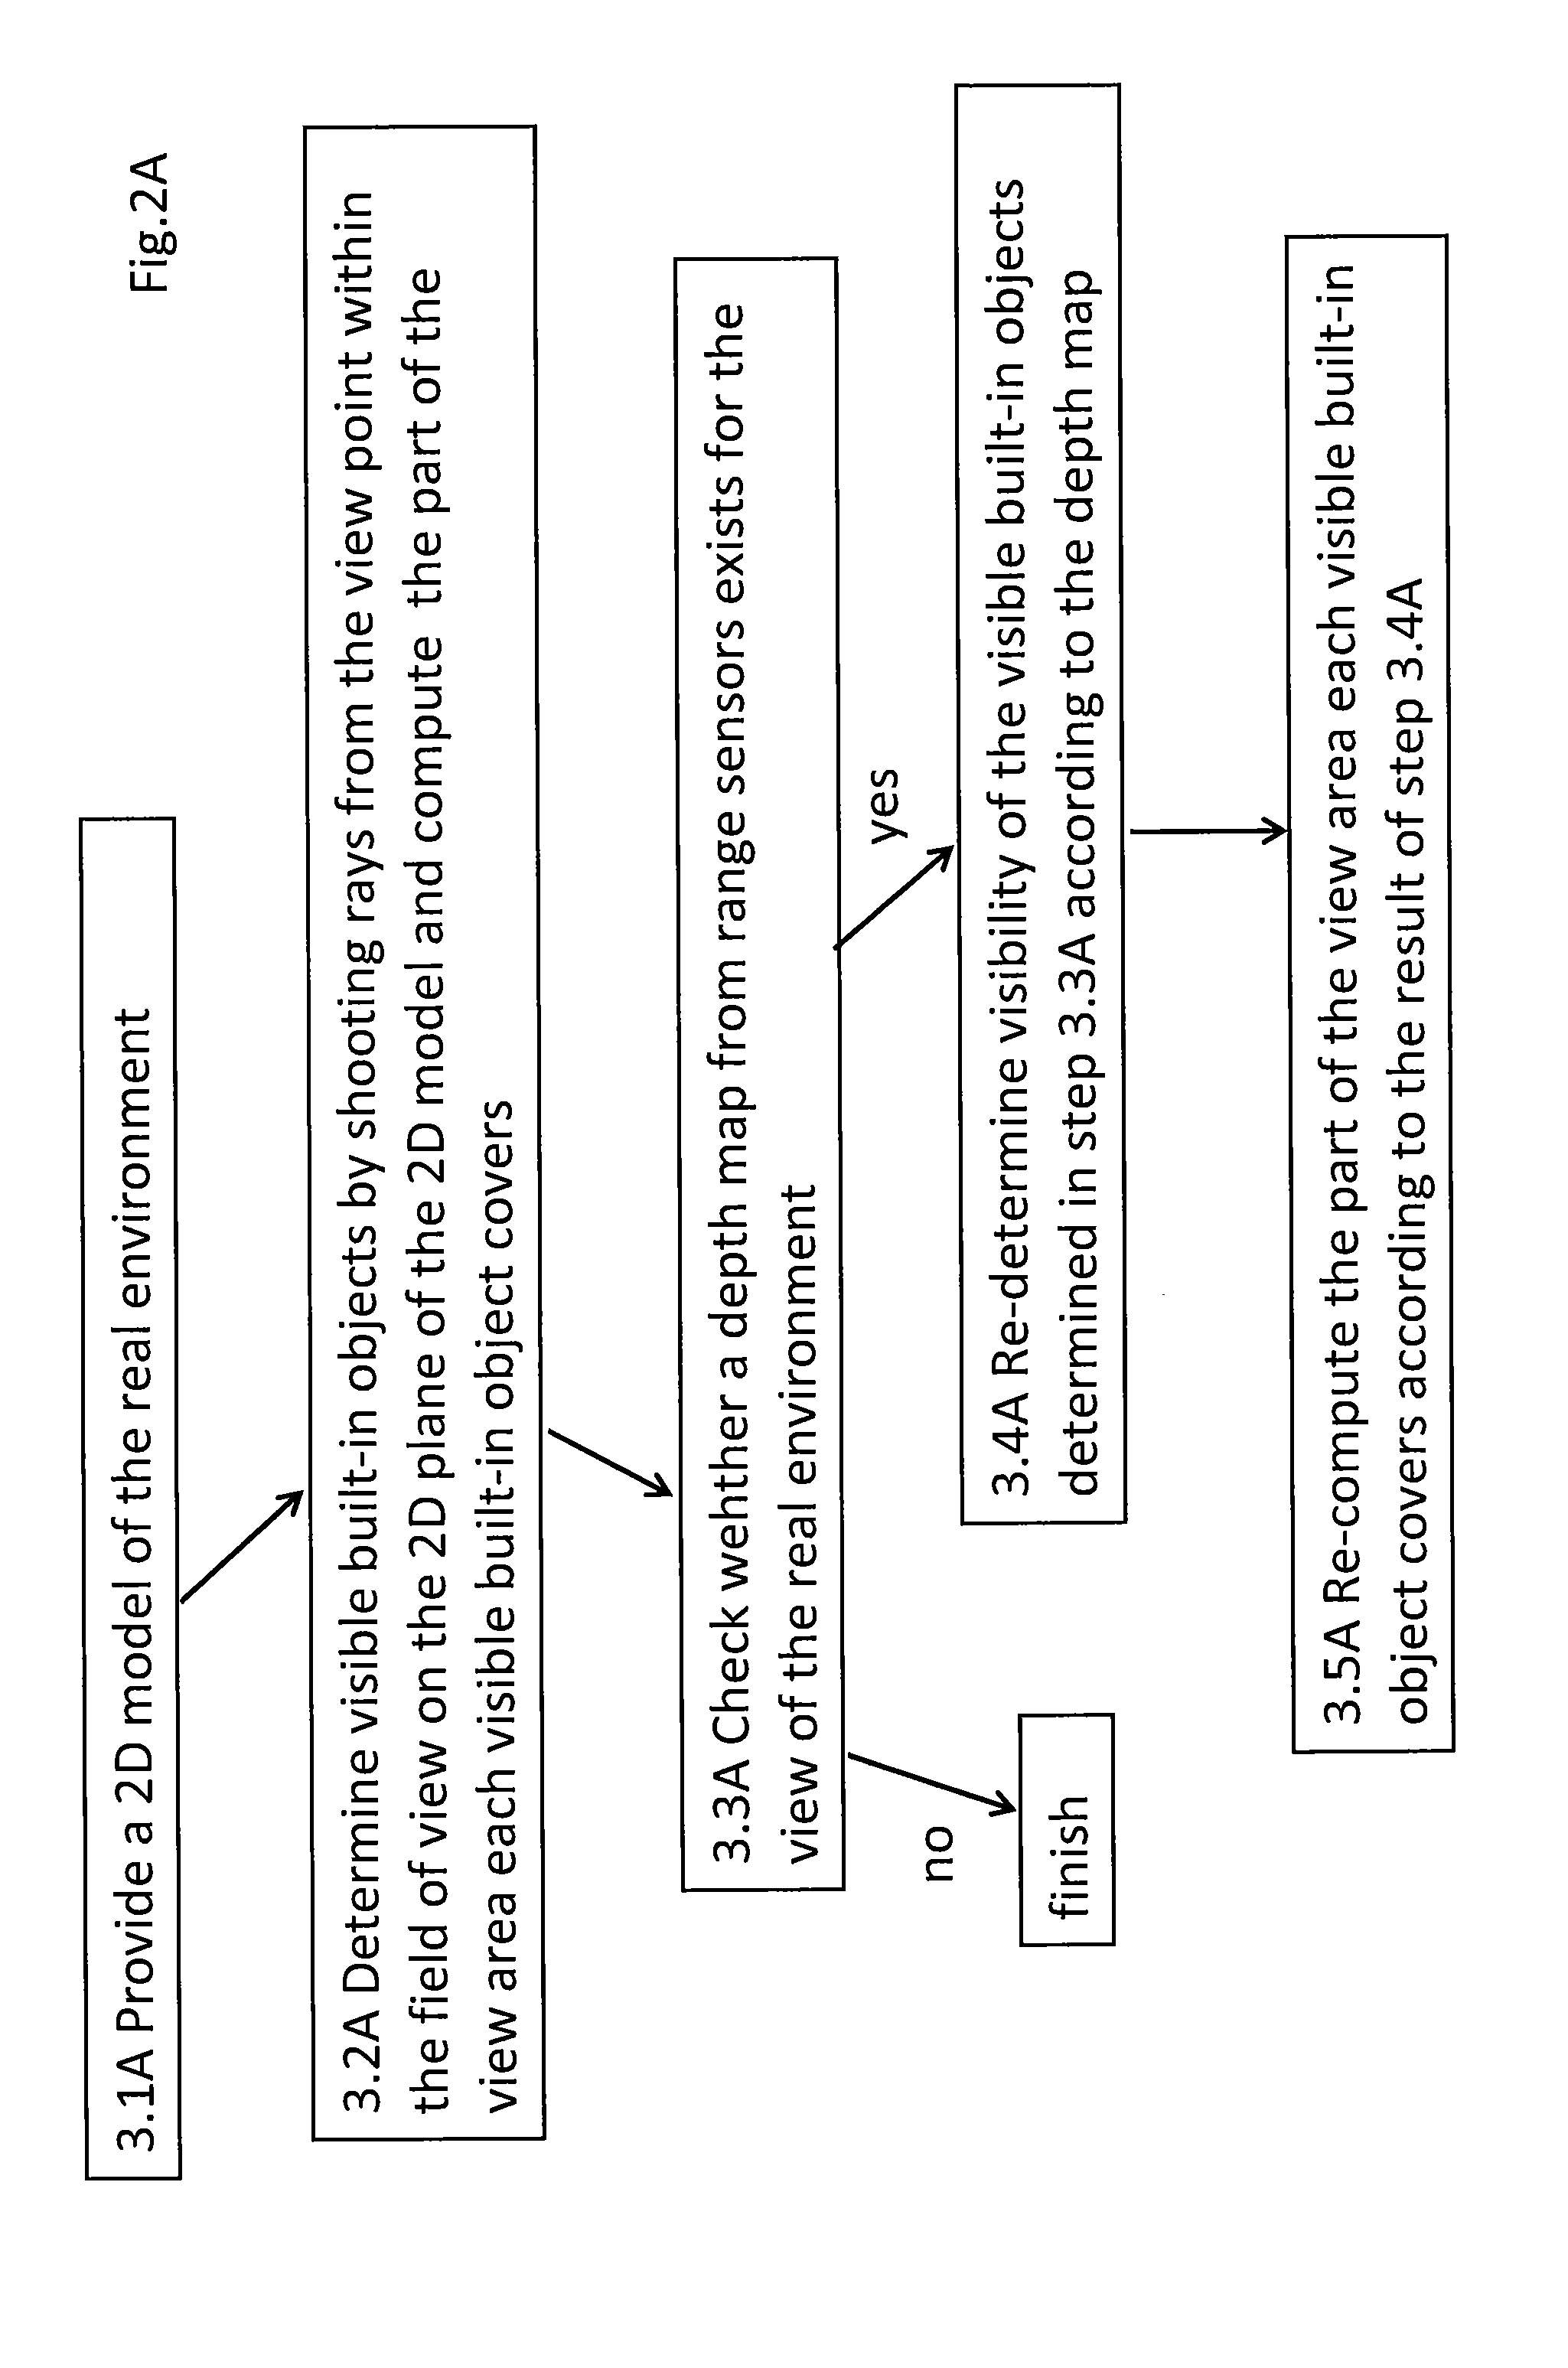 Method for Representing Virtual Information in a Real Environment